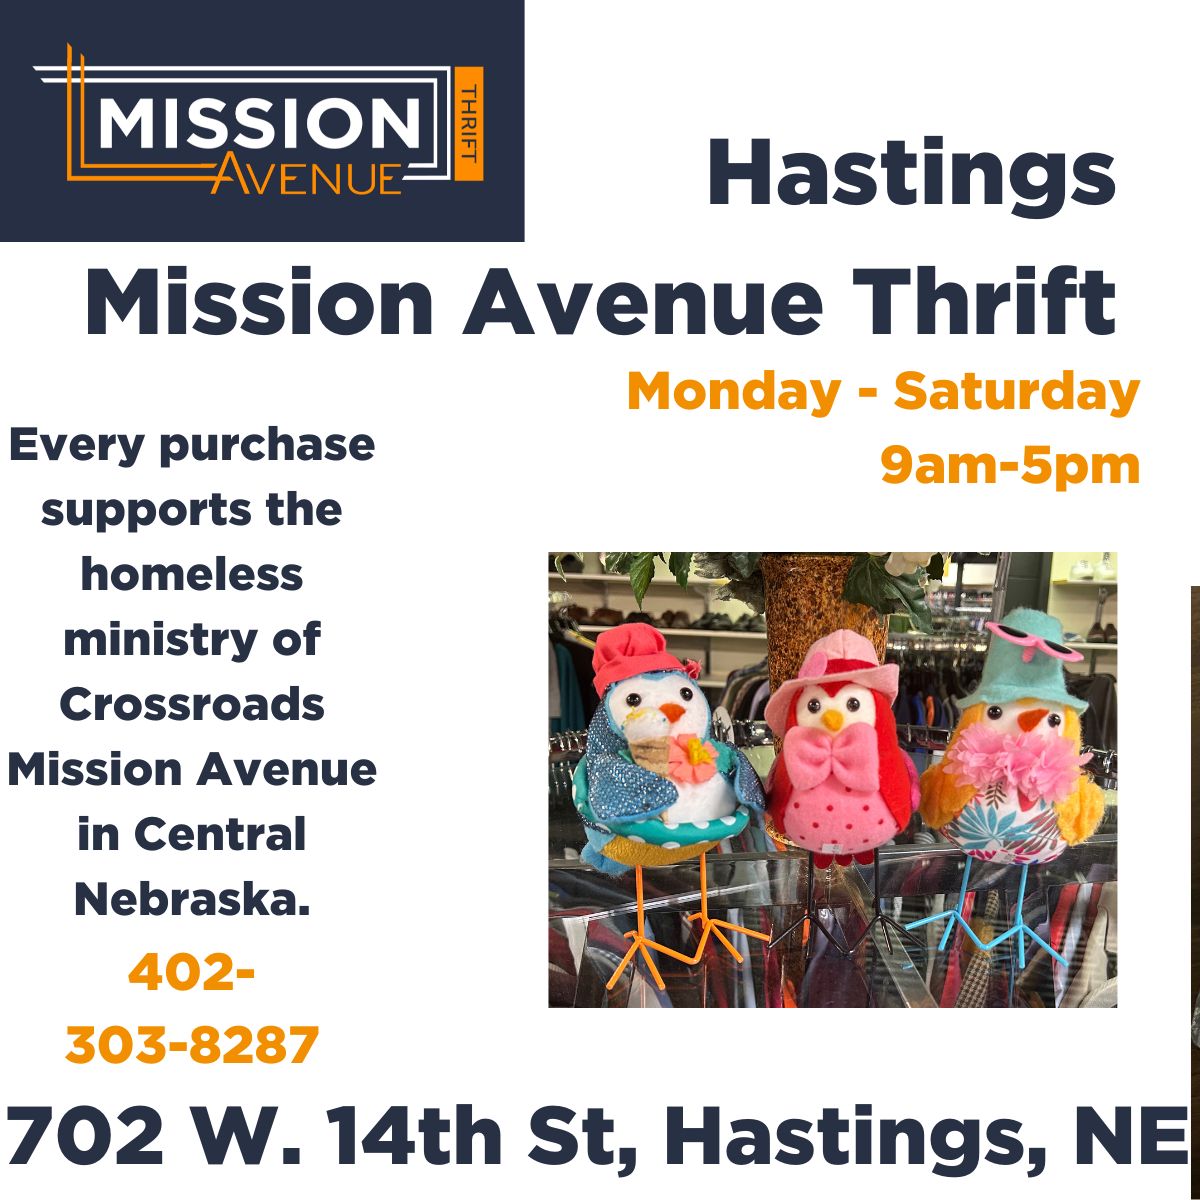 Come in TODAY and see what's NEW at Hastings Mission Avenue Thrift! crossroadsmission.com/thrift-stores/ #MissionAvenueThrift #HastingsNebraska #Thriftstore #Shoptoday